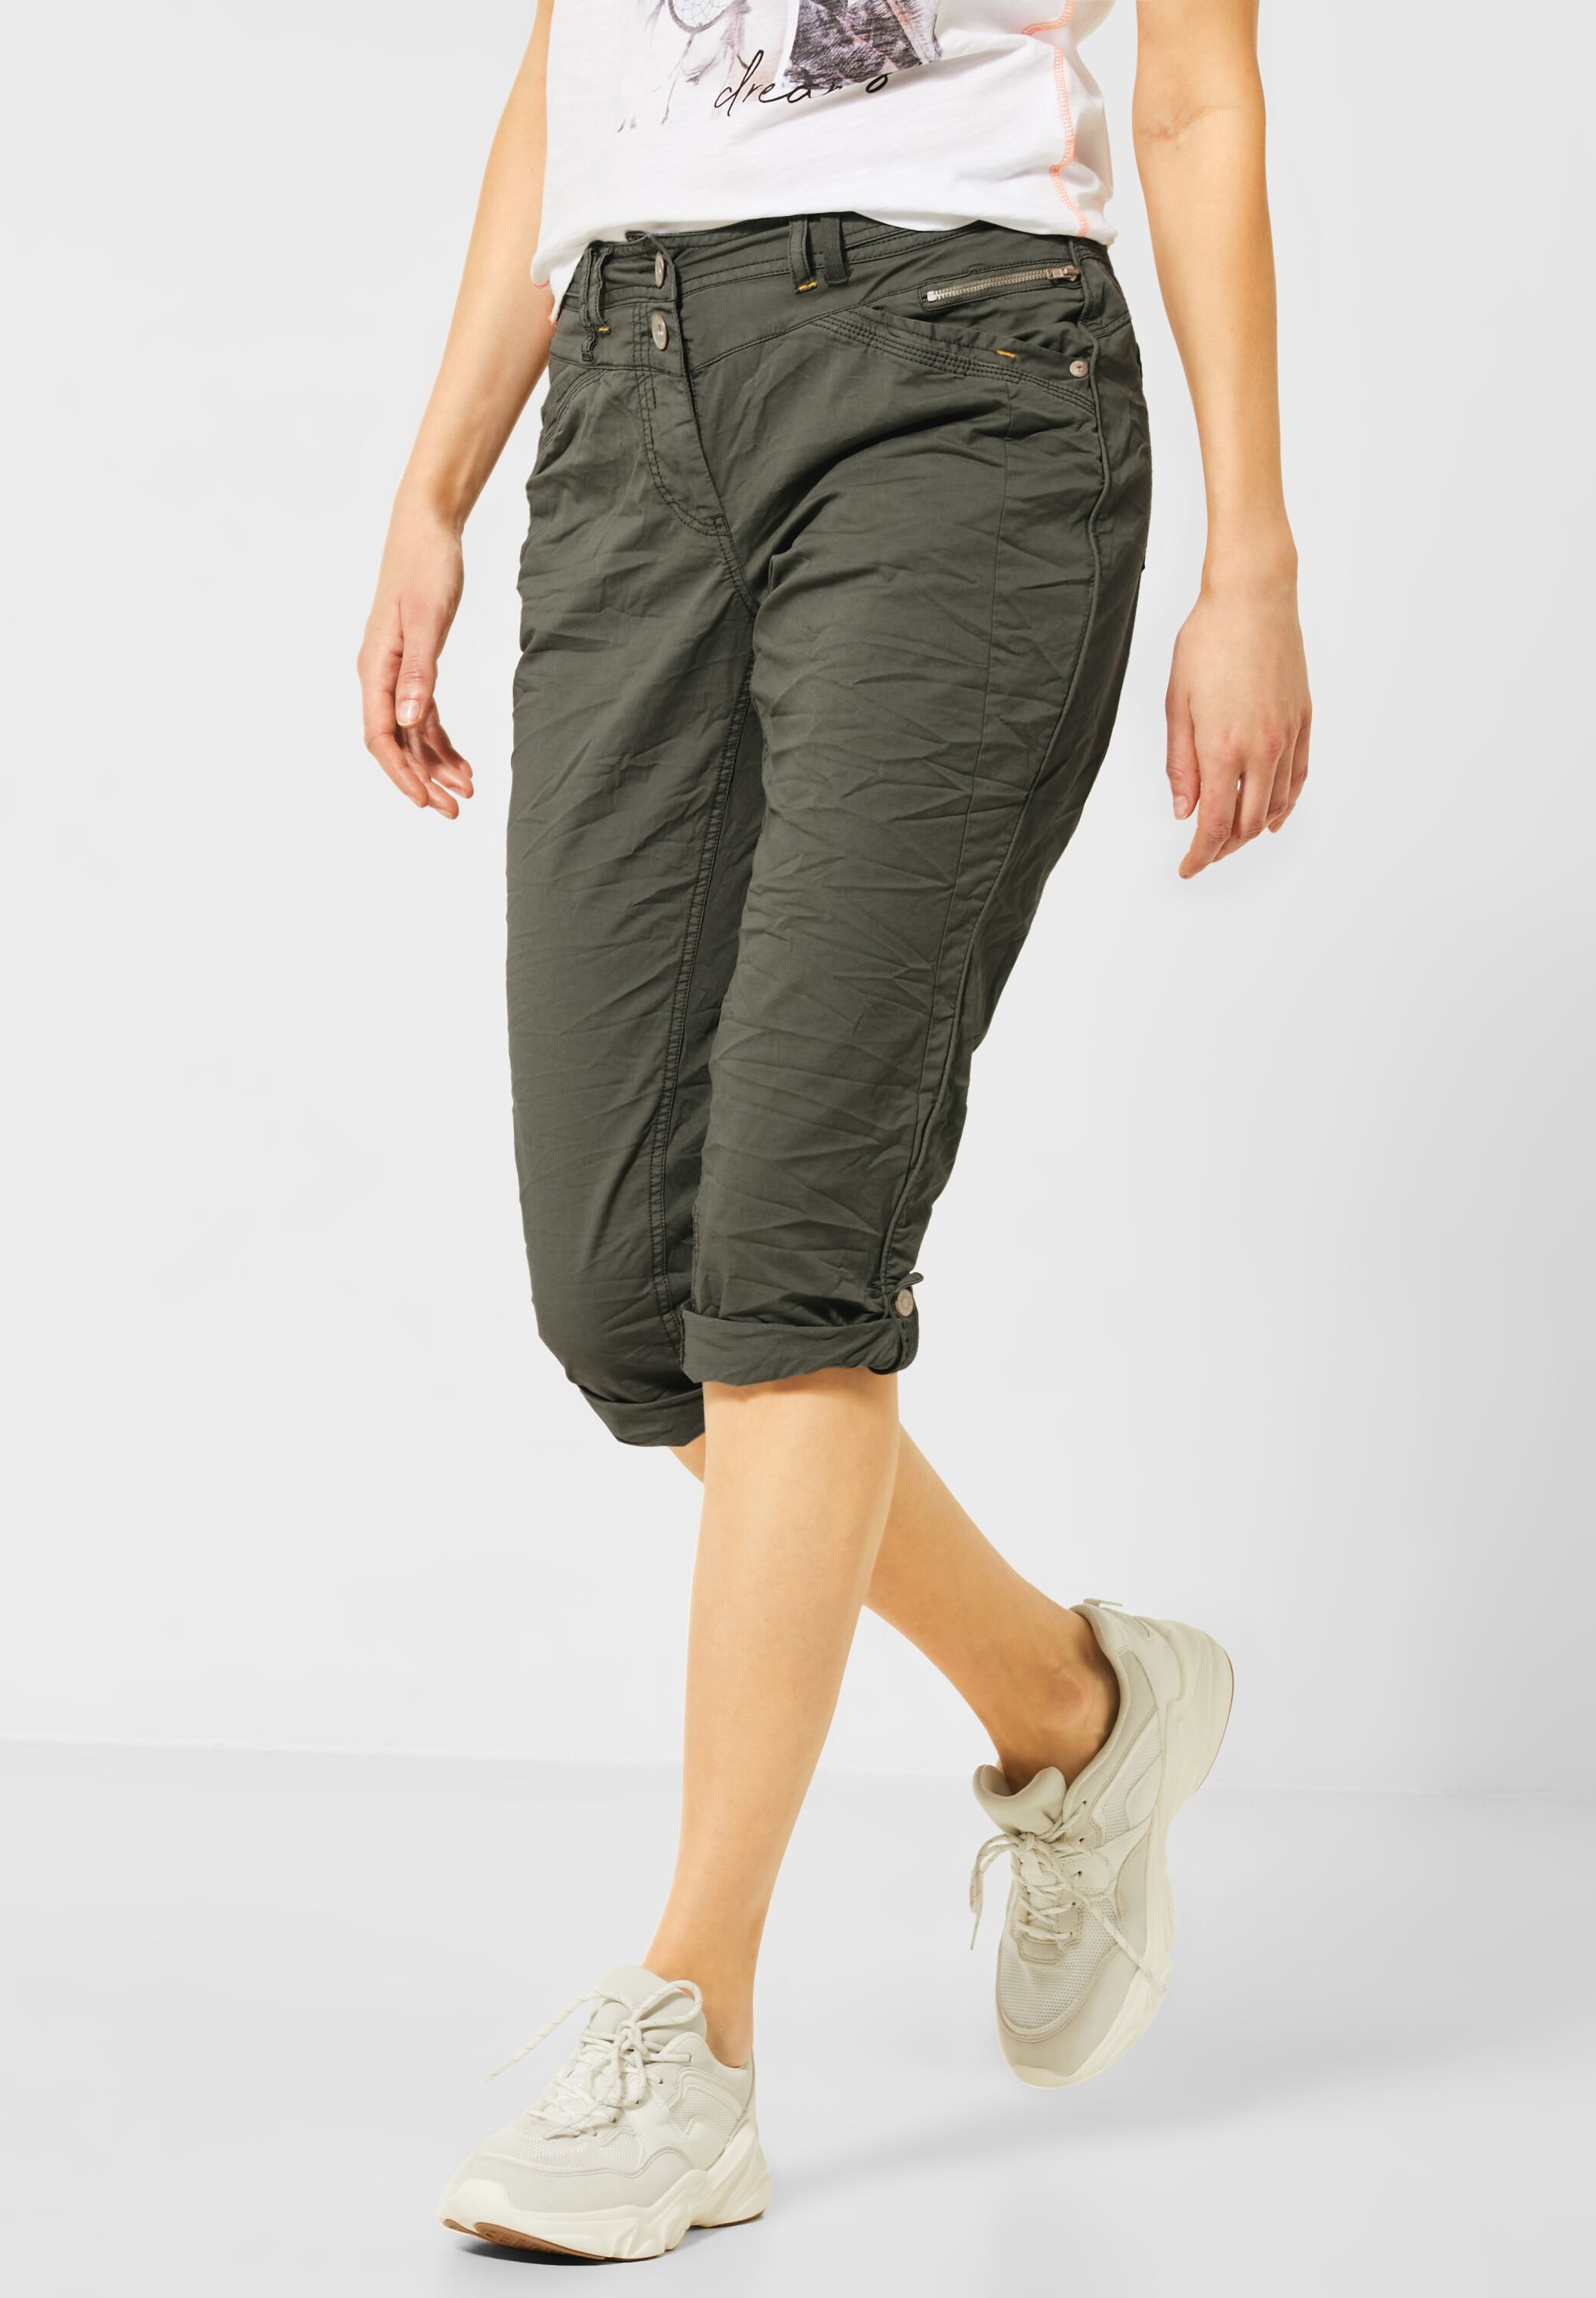 New CONCEPT 3/4 CECIL B373013-12173 in - Simply Hose Mode York Khaki